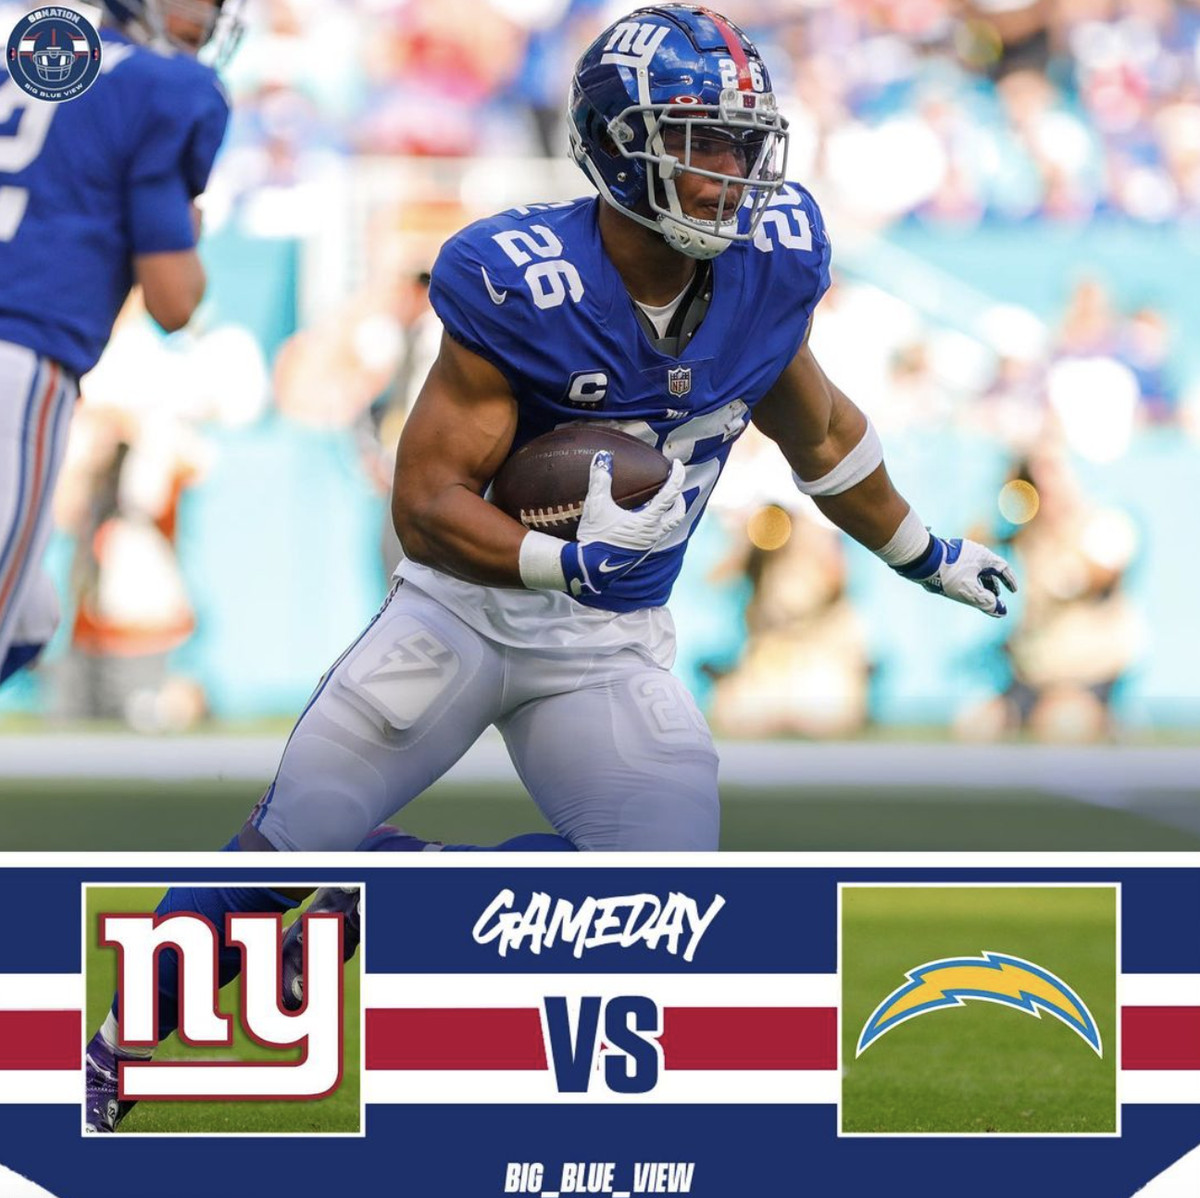 Giants vs. Chargers game day, Week 14: Live updates - Big Blue View